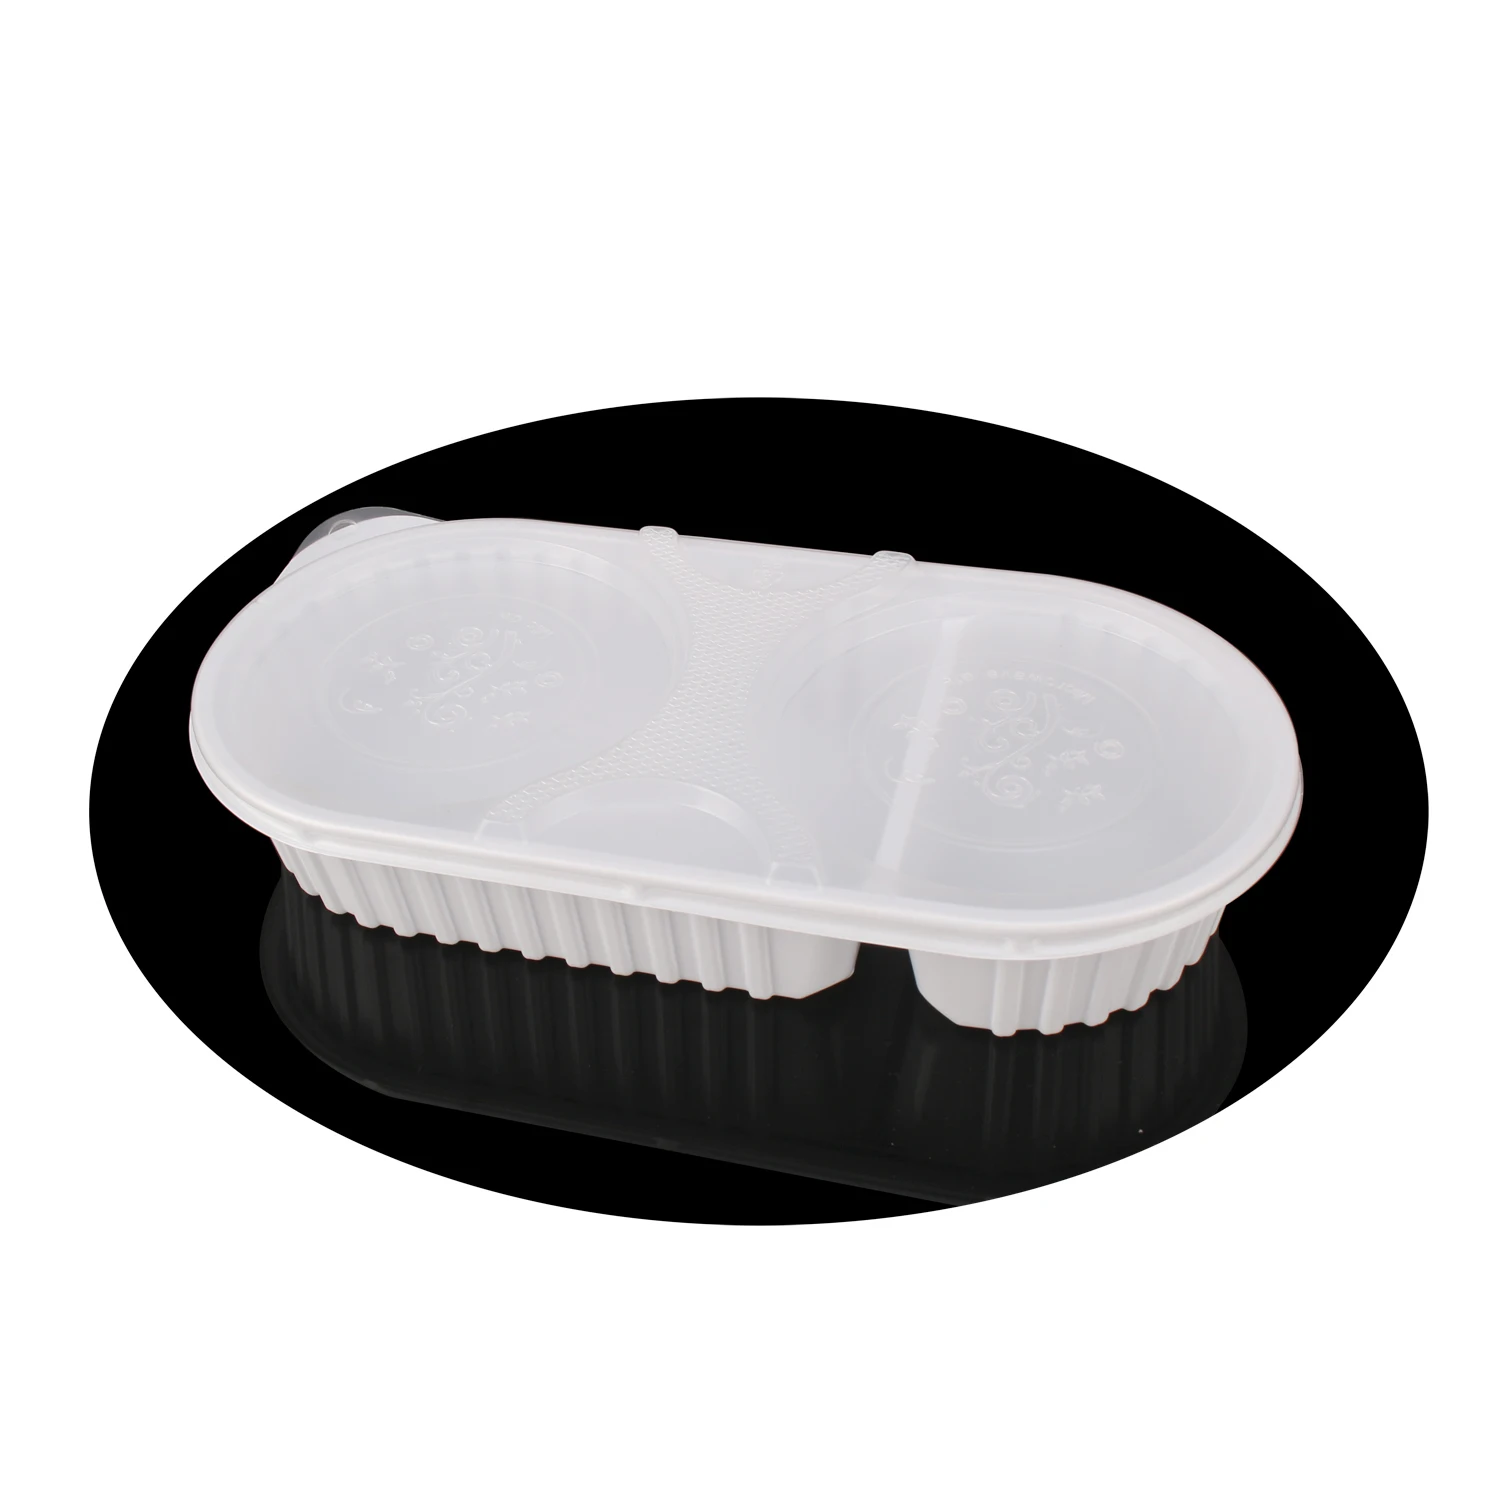 rubbermaid 2 compartment food container